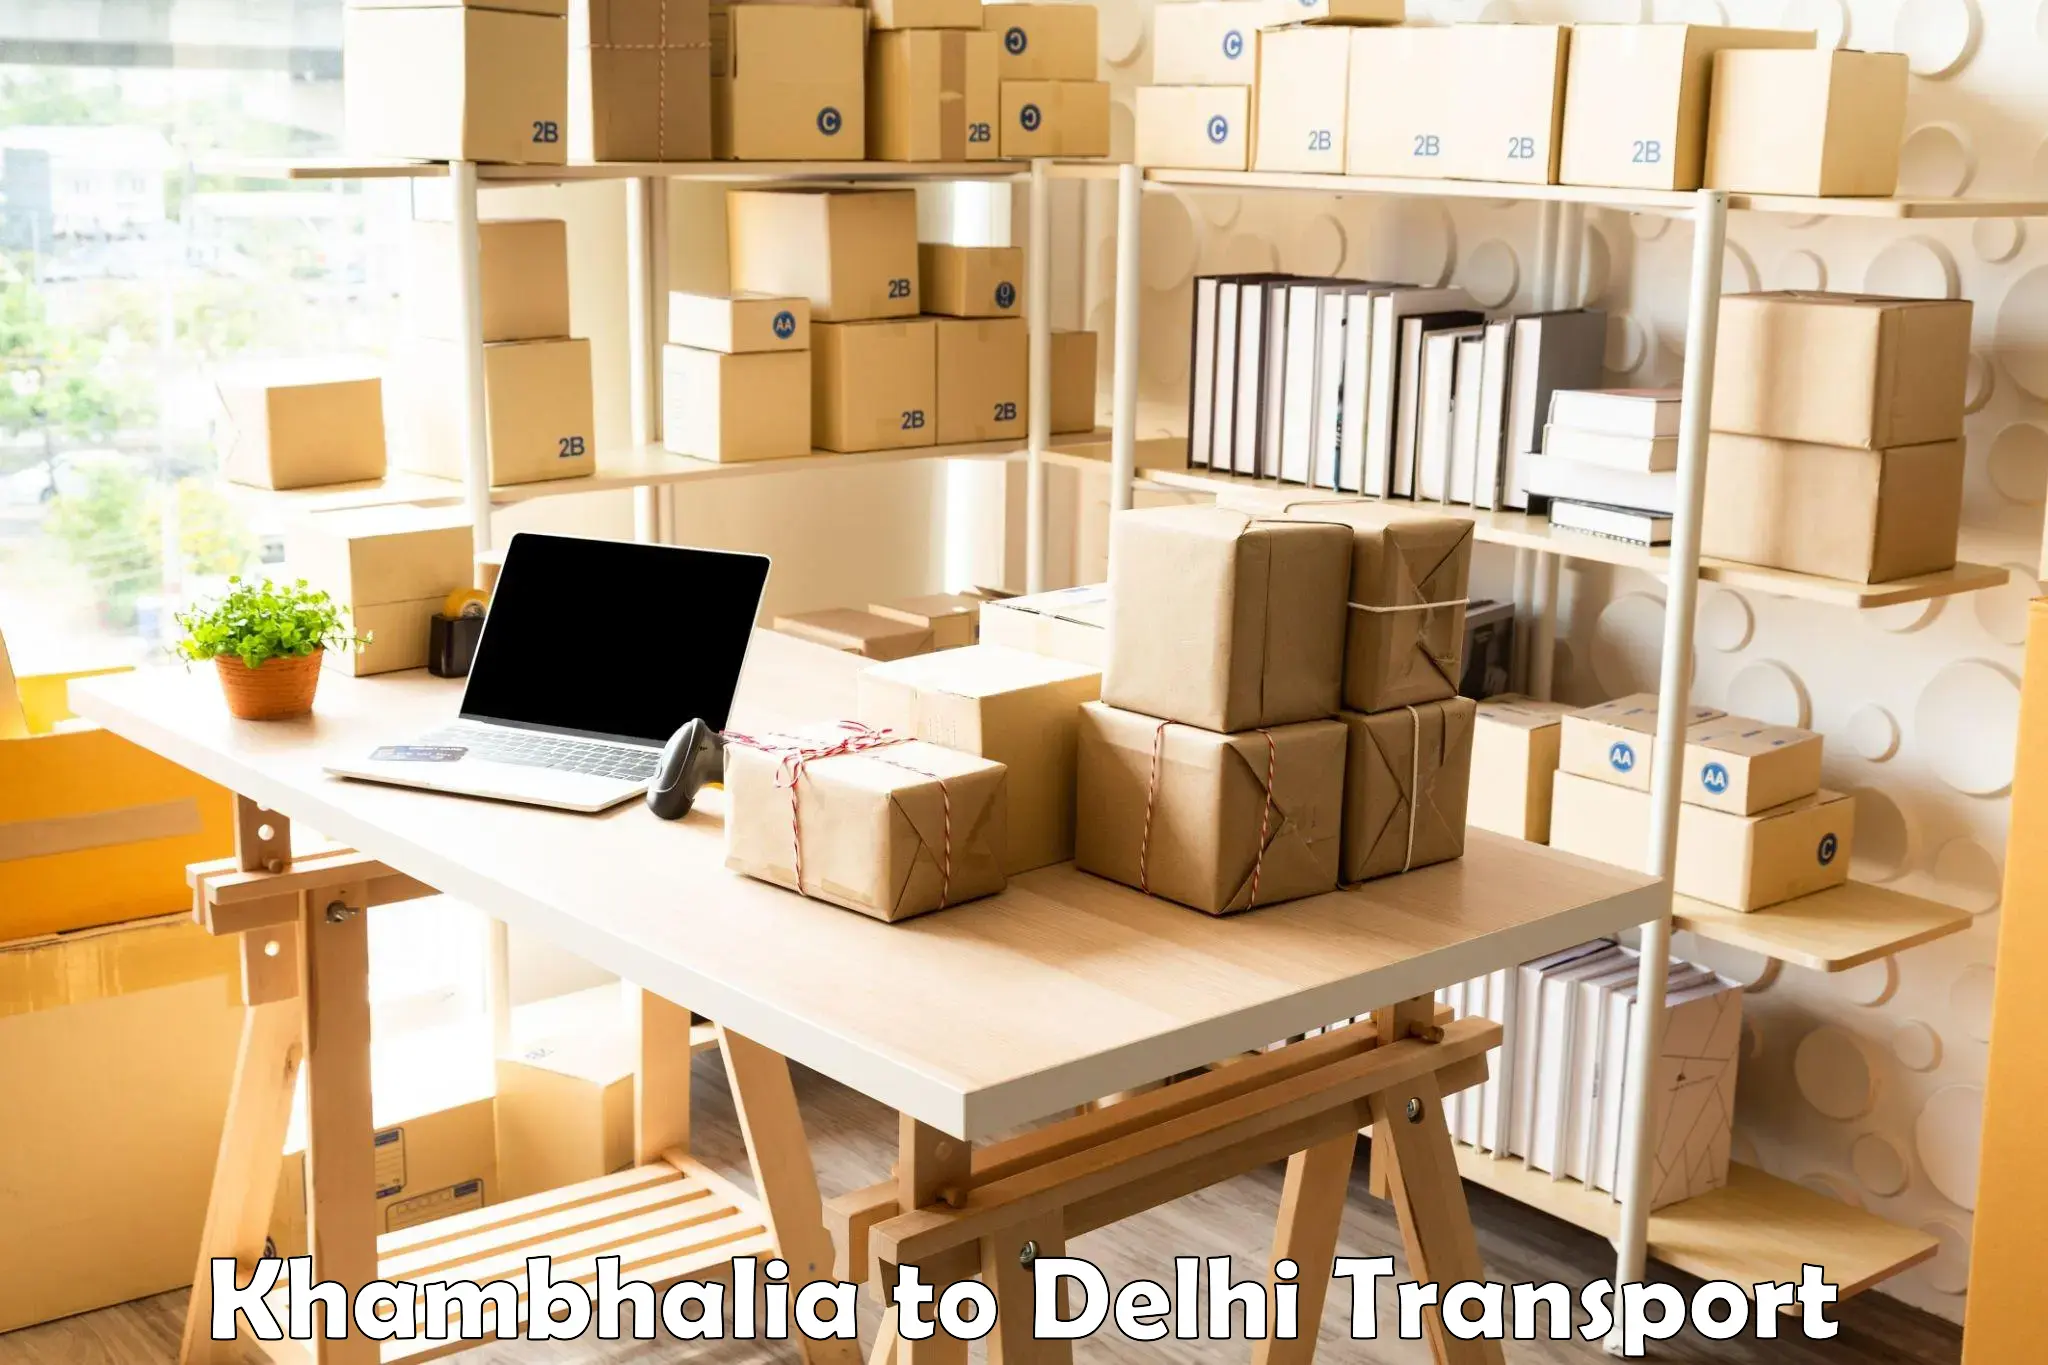 Daily parcel service transport in Khambhalia to Lodhi Road